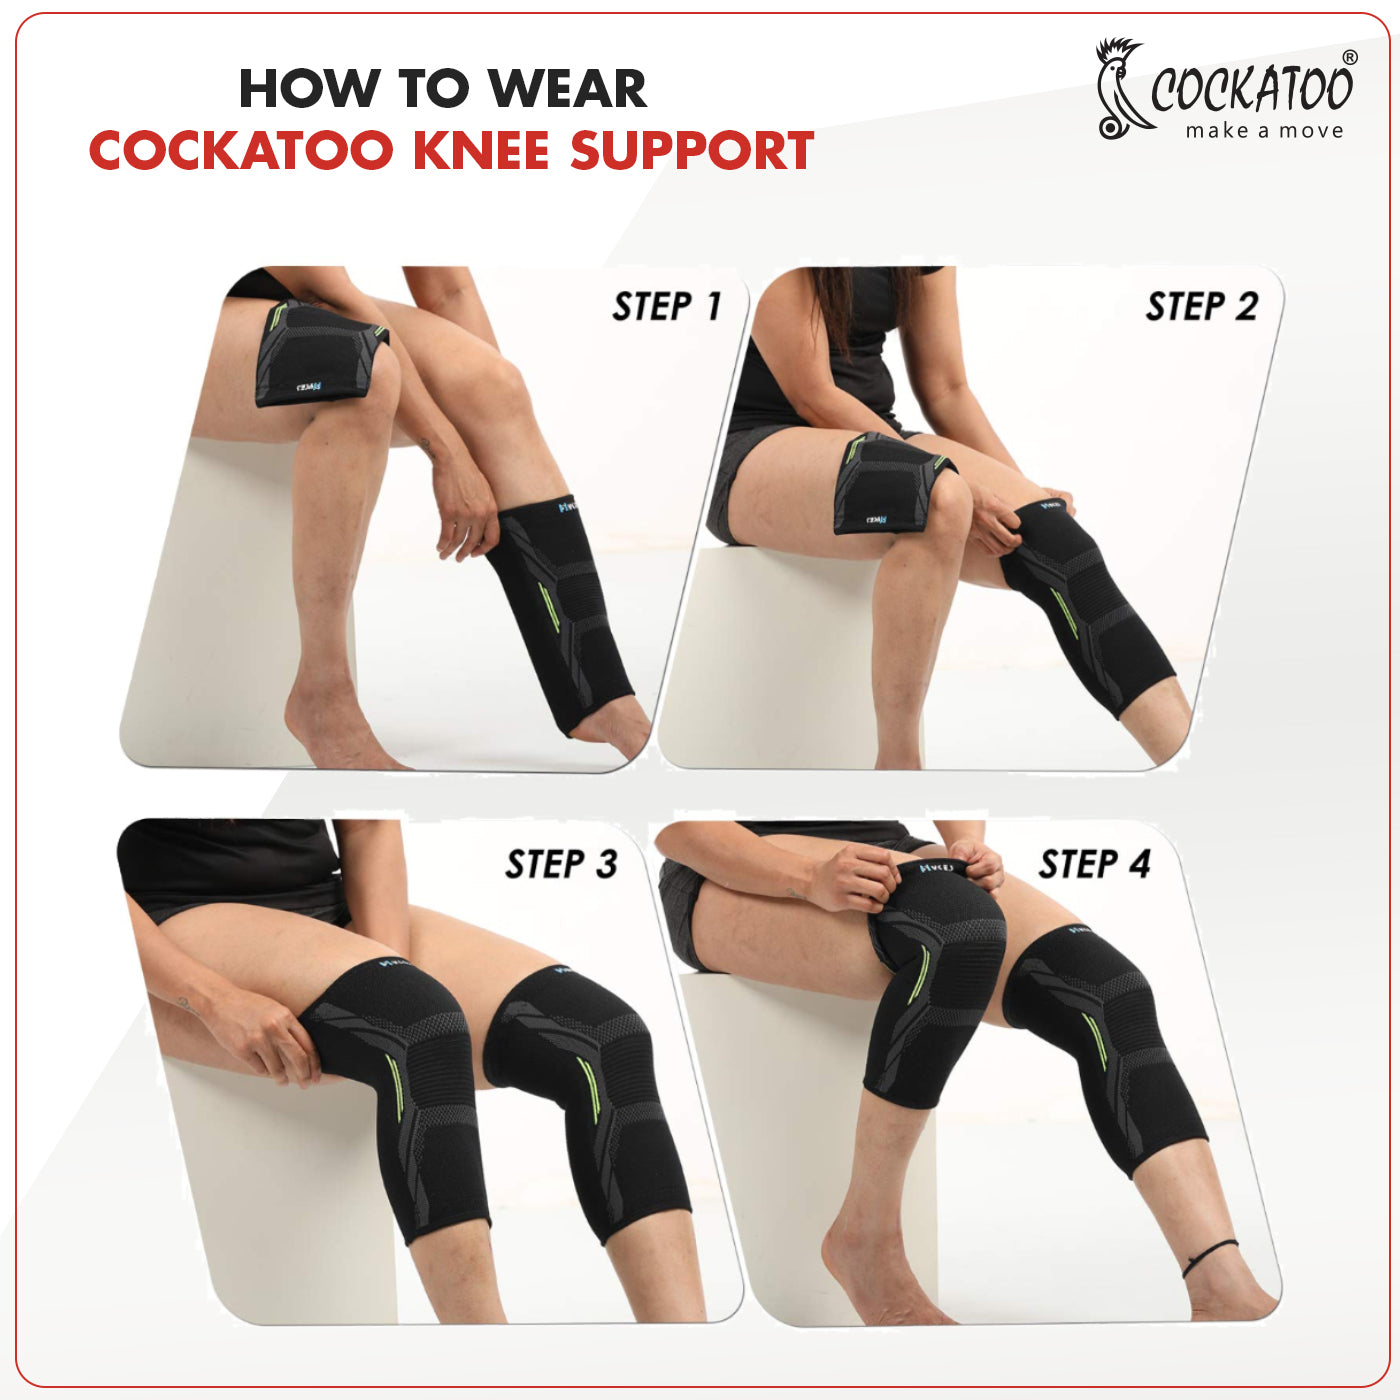 Cockatoo Knee Compression Support KN-444 - Nylon & Spandex Material - Green Color - Extra-Large Size - for Gym, Running, Cycling, Sports, Jogging, Workout, and Pain Relief